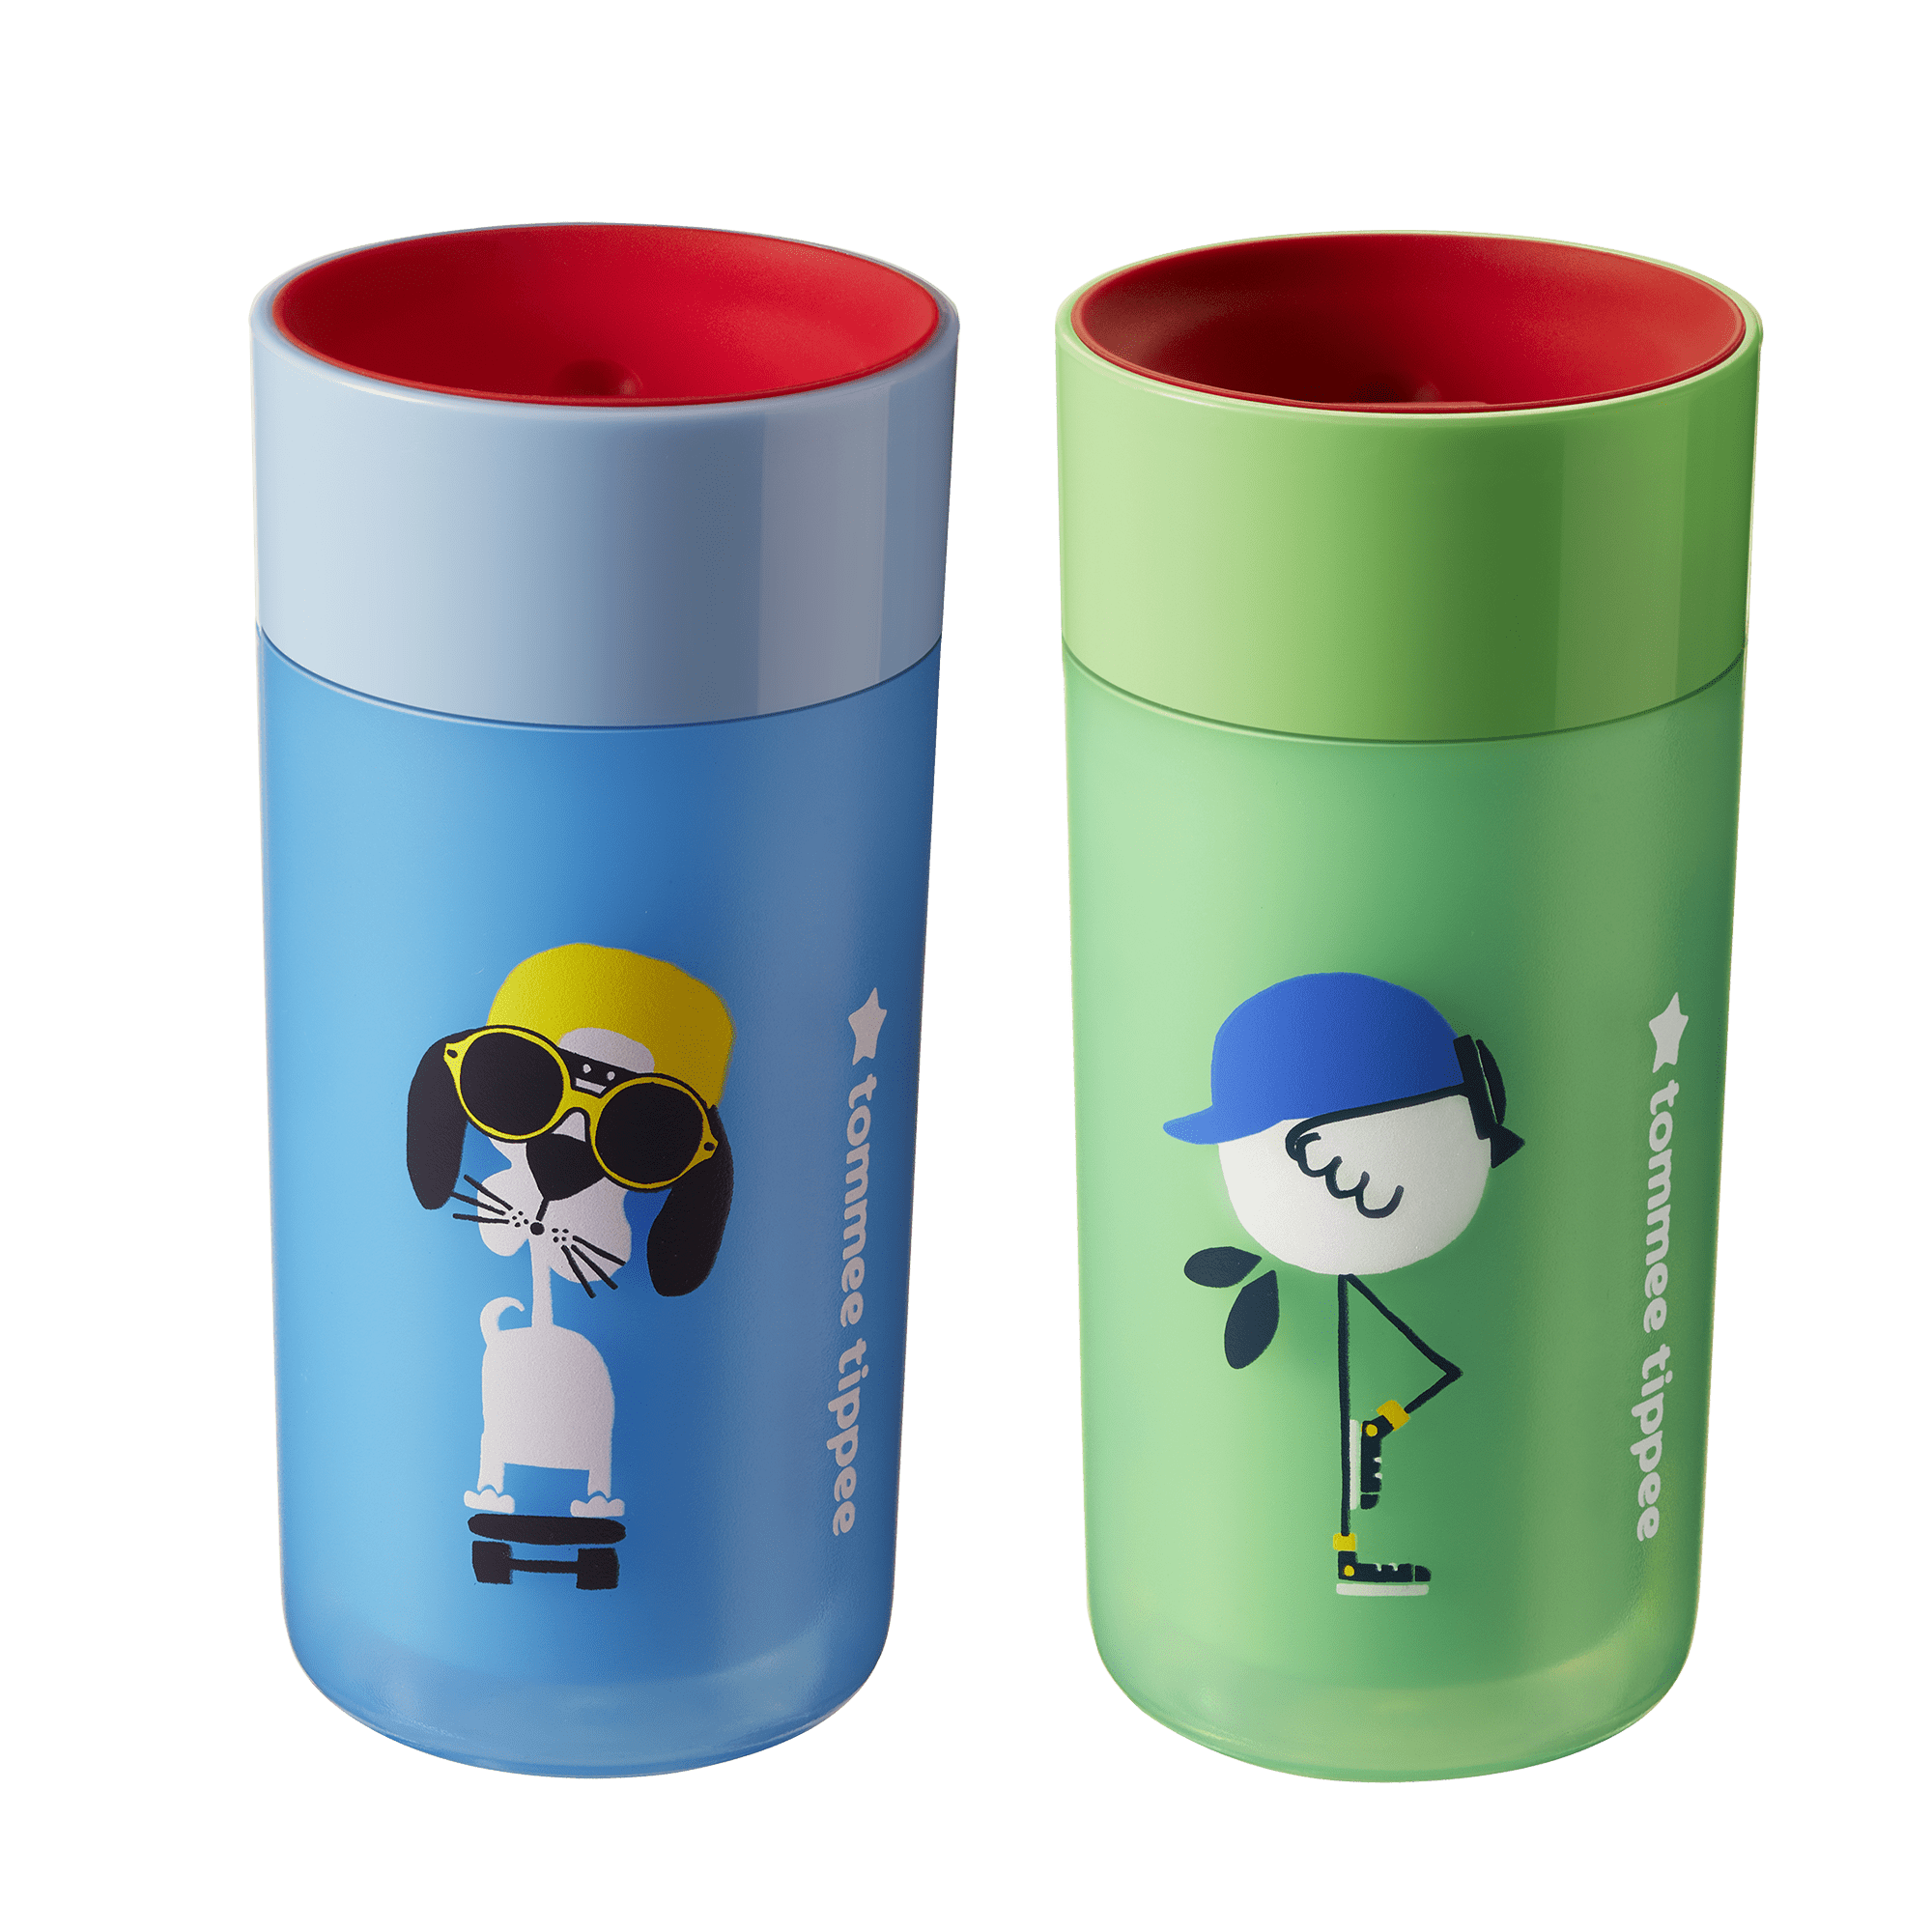 Tommee Tippee Explora Spill-Proof Drinking Cup ~ Giveaway - TheSuburbanMom